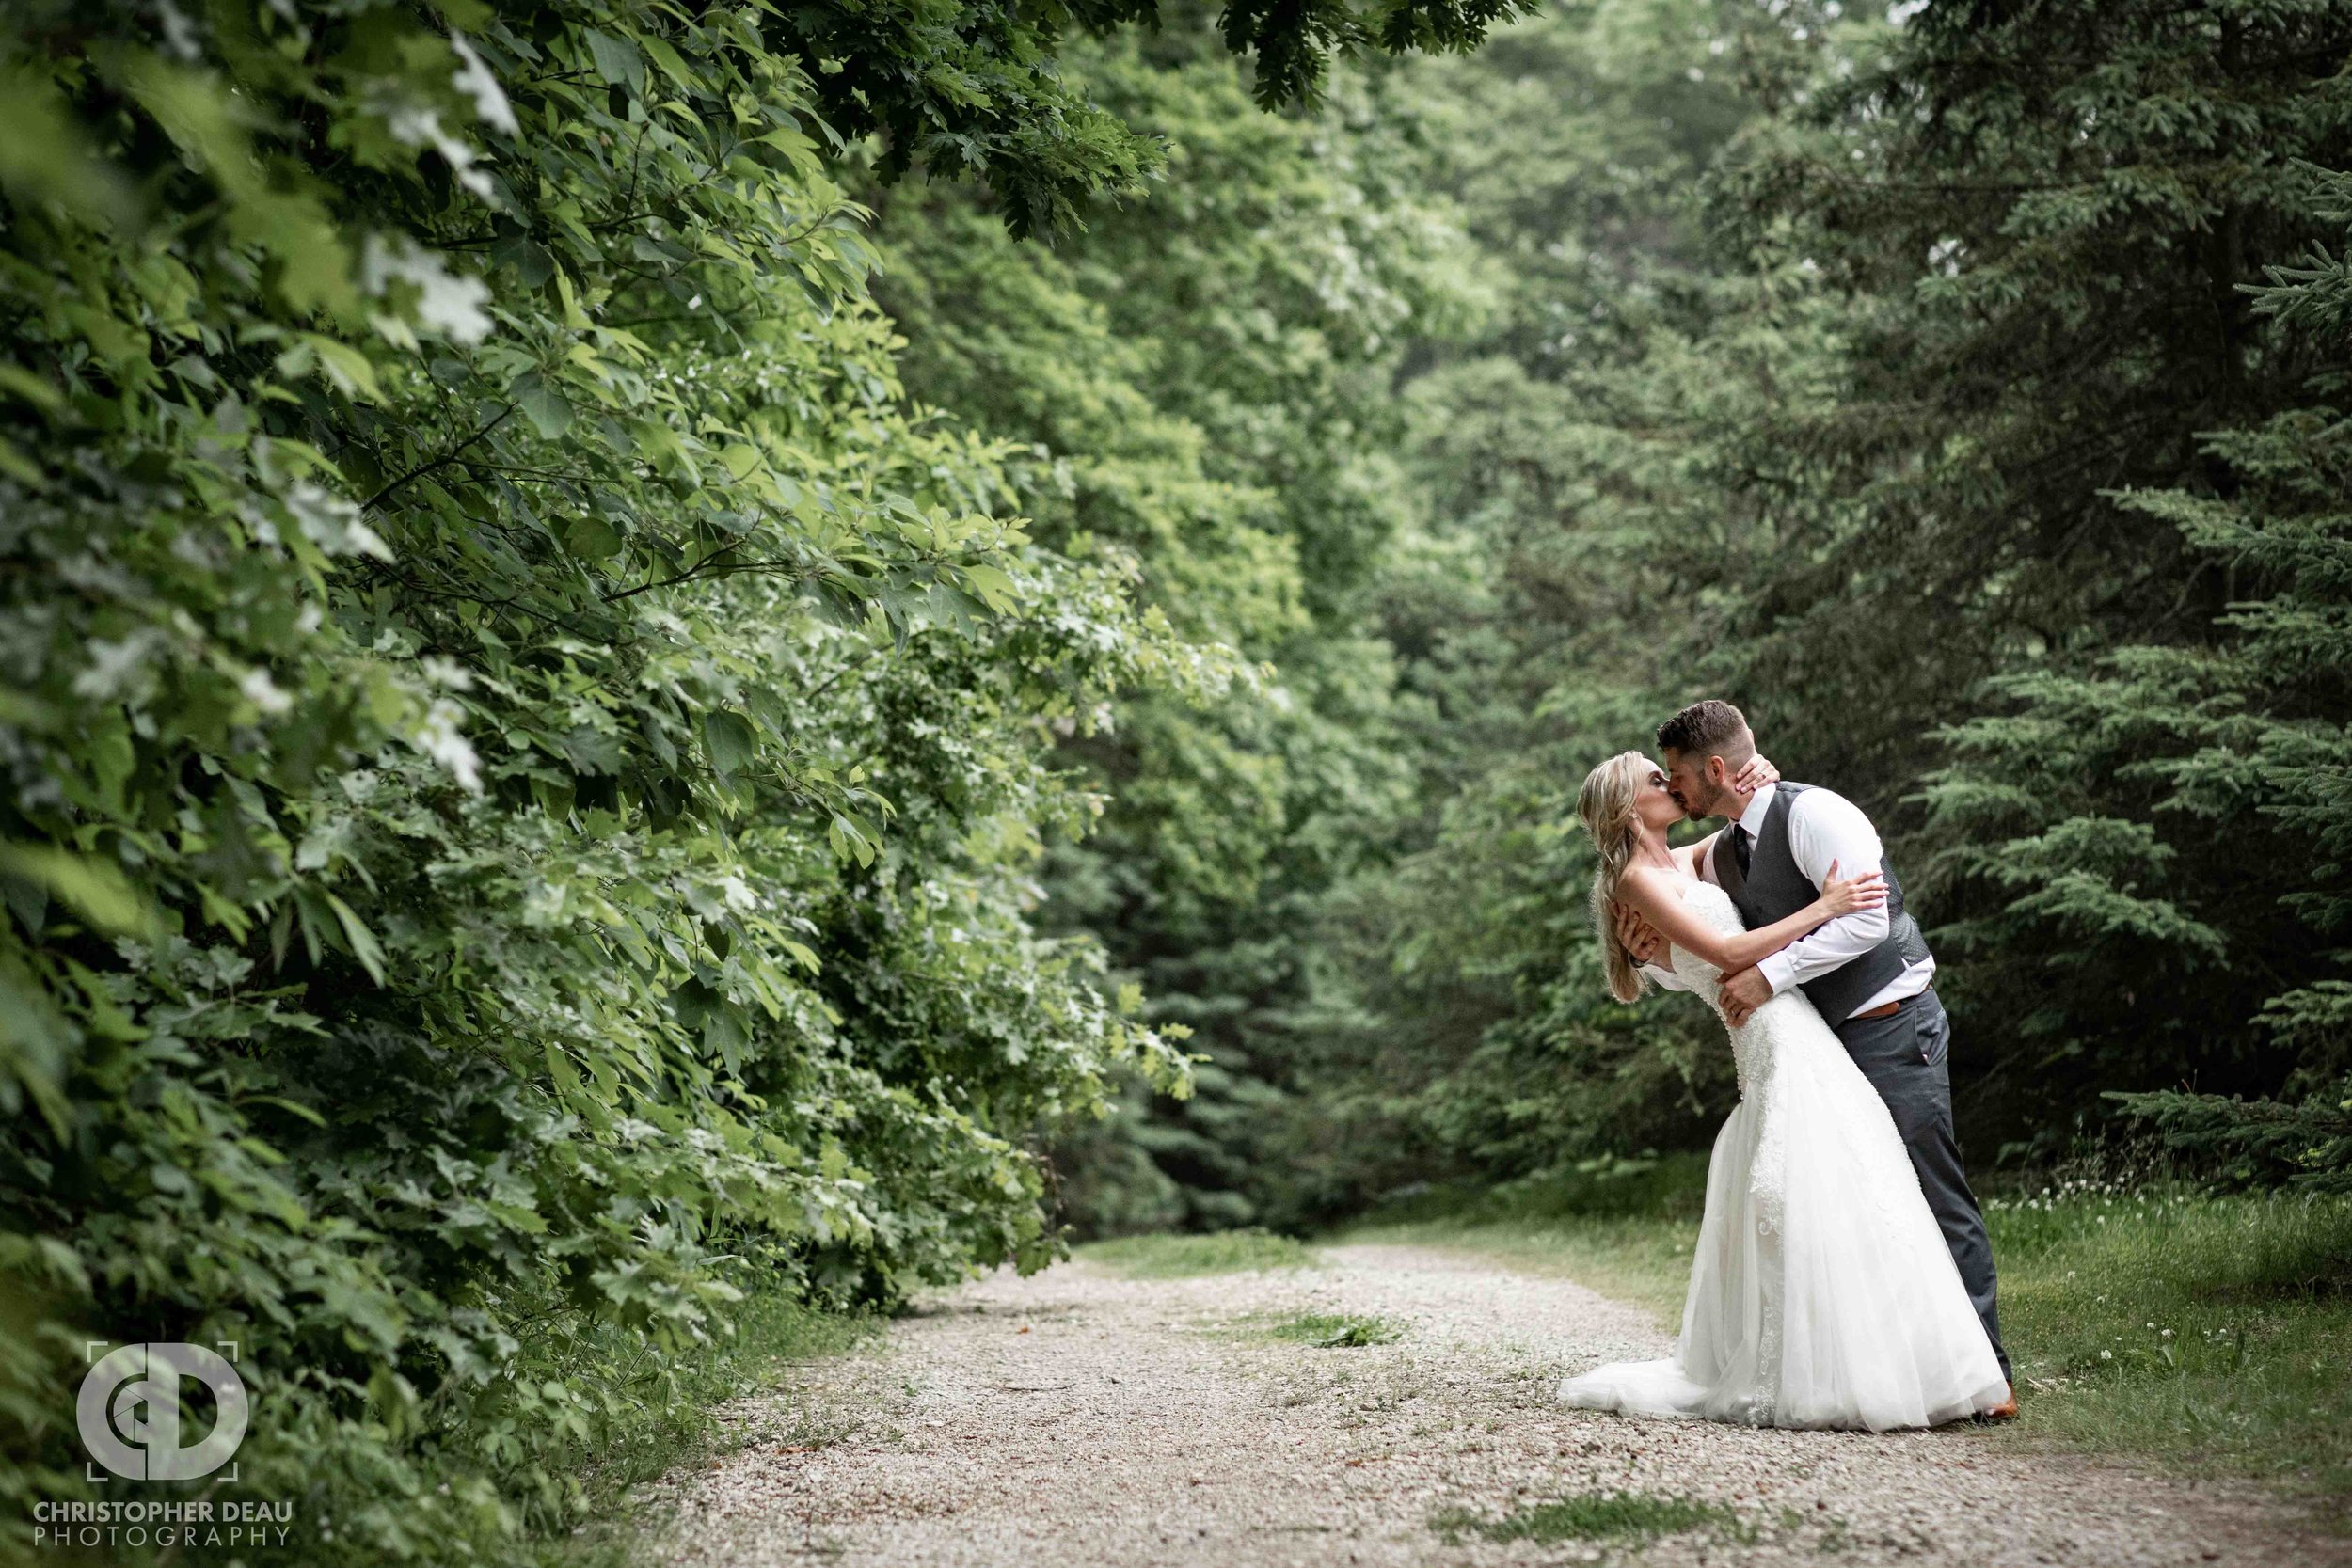  bride and groom on a dirt road with pine trees at Gable Hill 